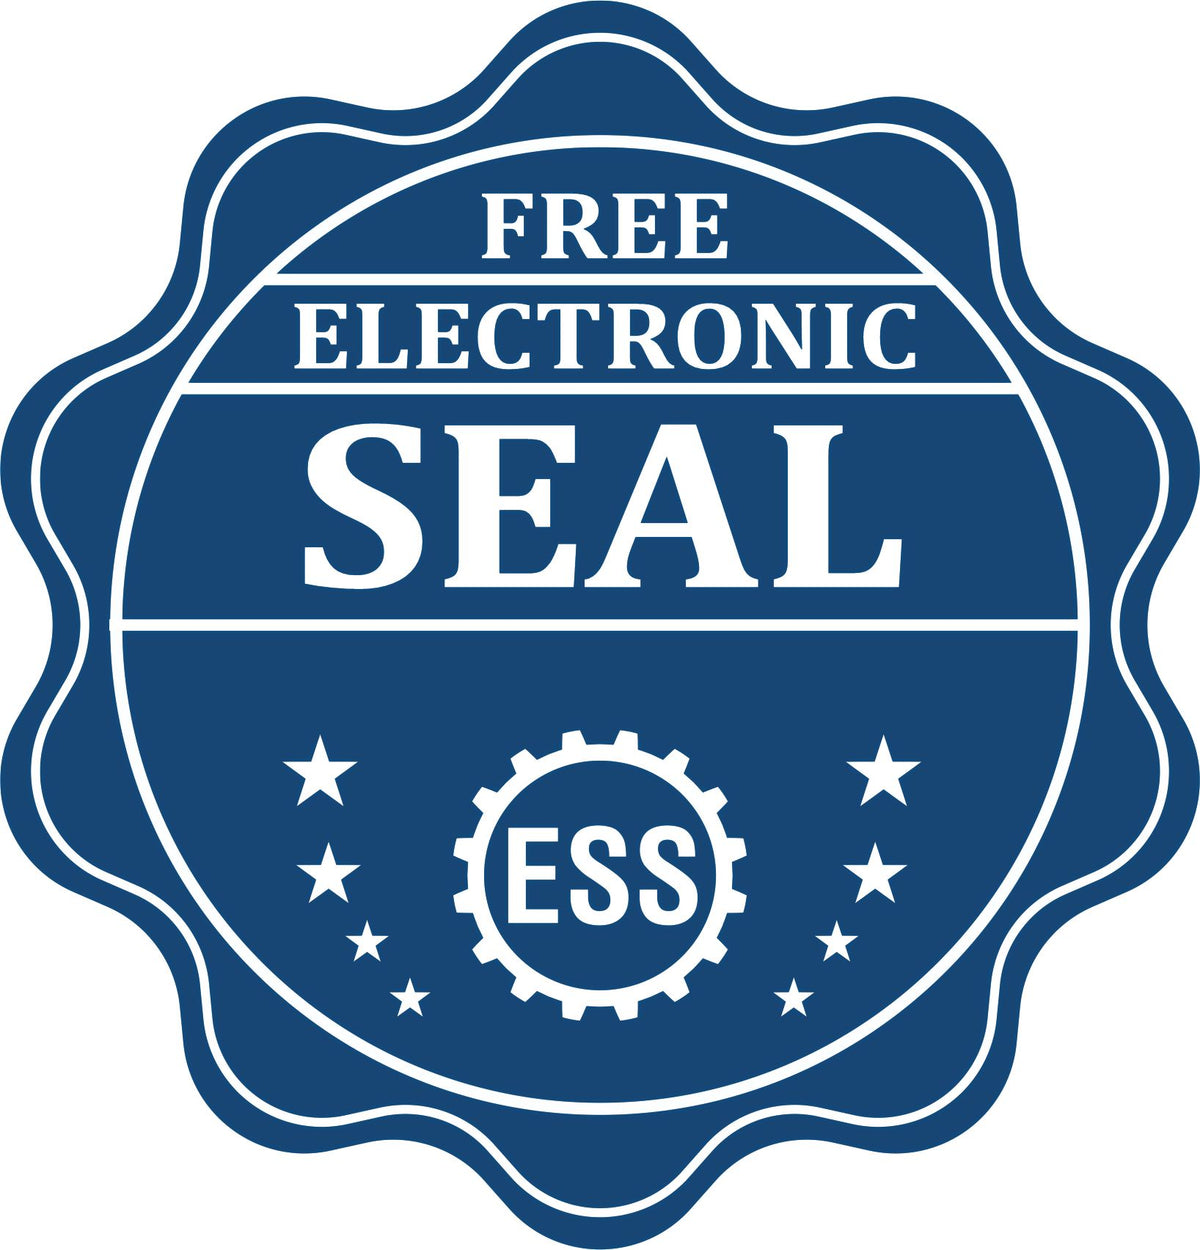 A badge showing a free electronic seal for the Slim Pre-Inked Rectangular Notary Stamp for Arkansas with stars and the ESS gear on the emblem.